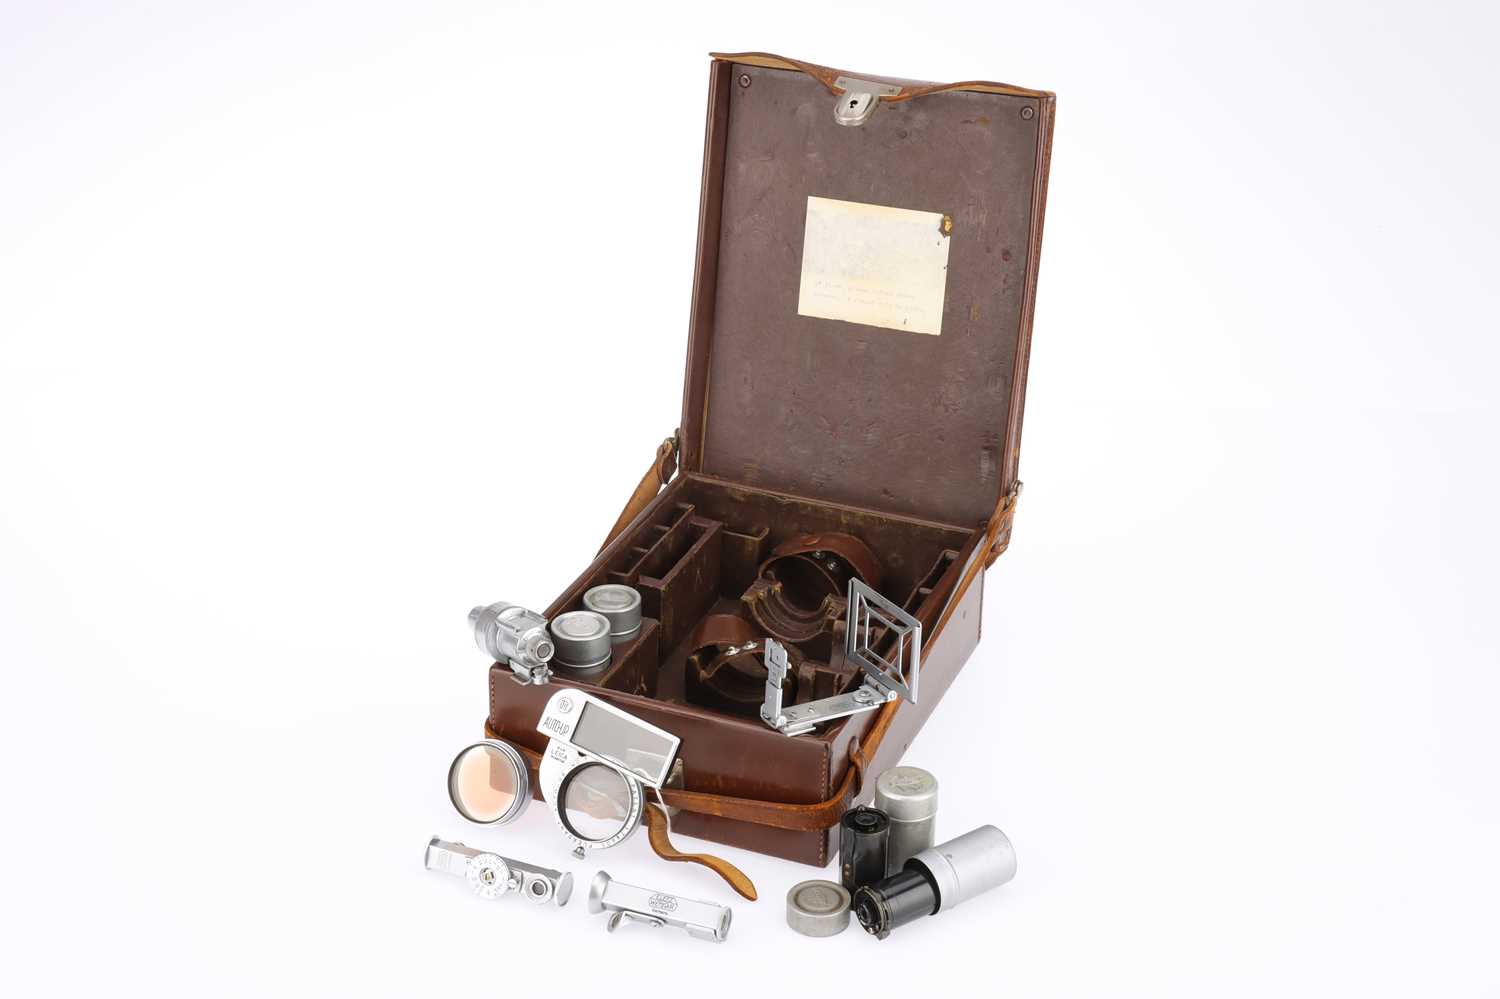 Lot 33 - A Leitz Wetzlar Camera Outfit Case with Leica Accessories